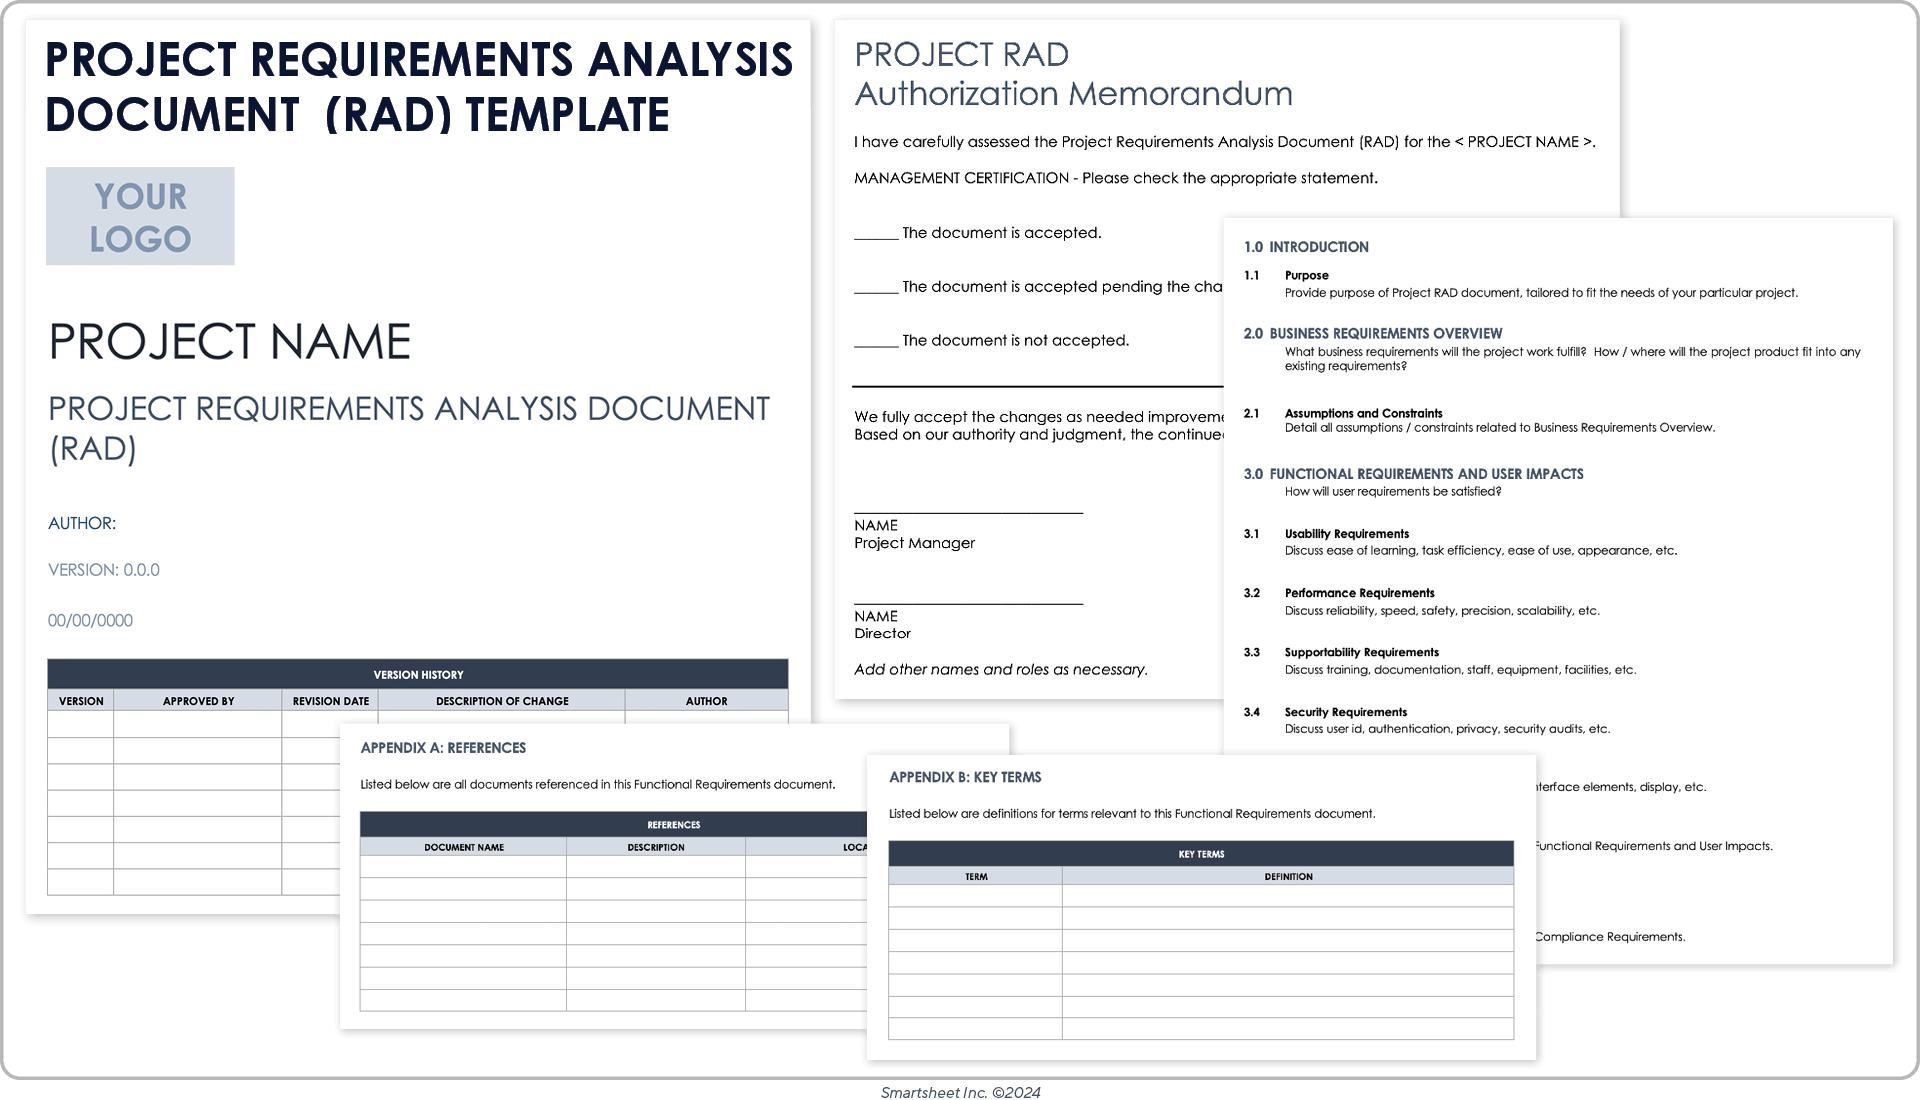 Project Requirements Analysis Document RAD